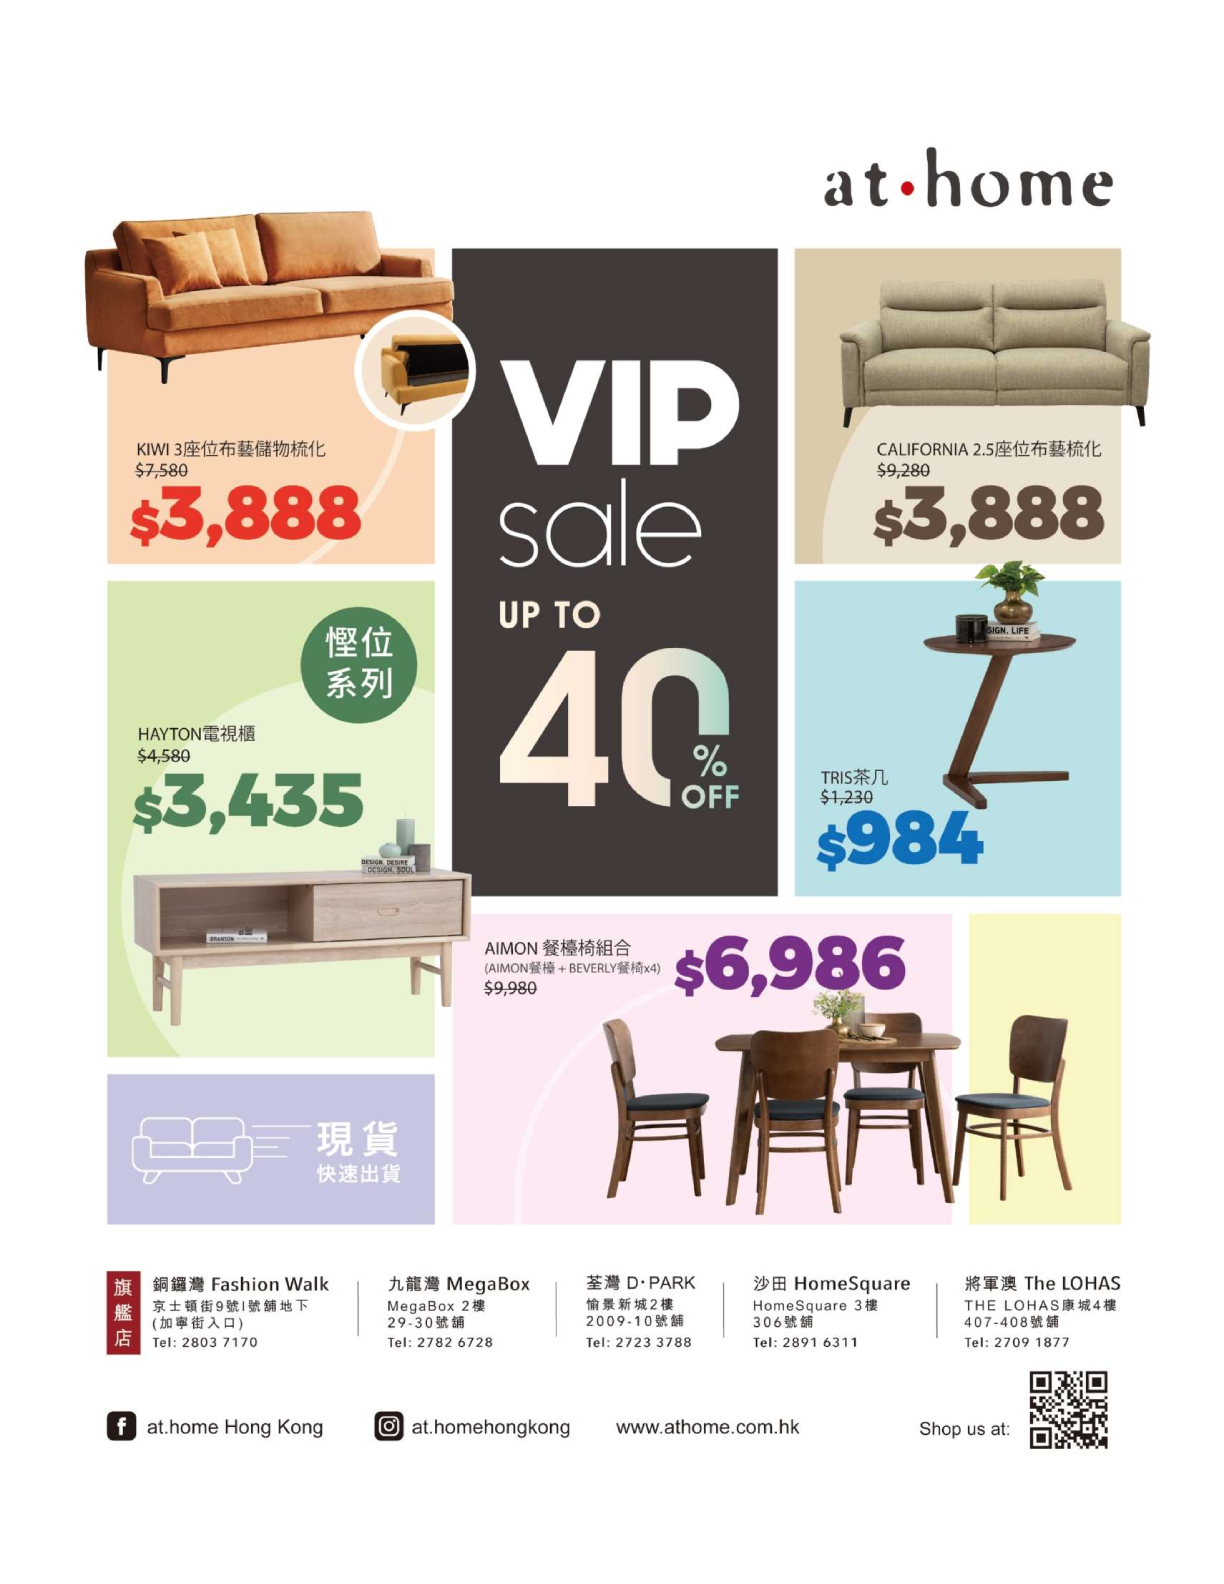 at. Home: VIP sale up to 40% off